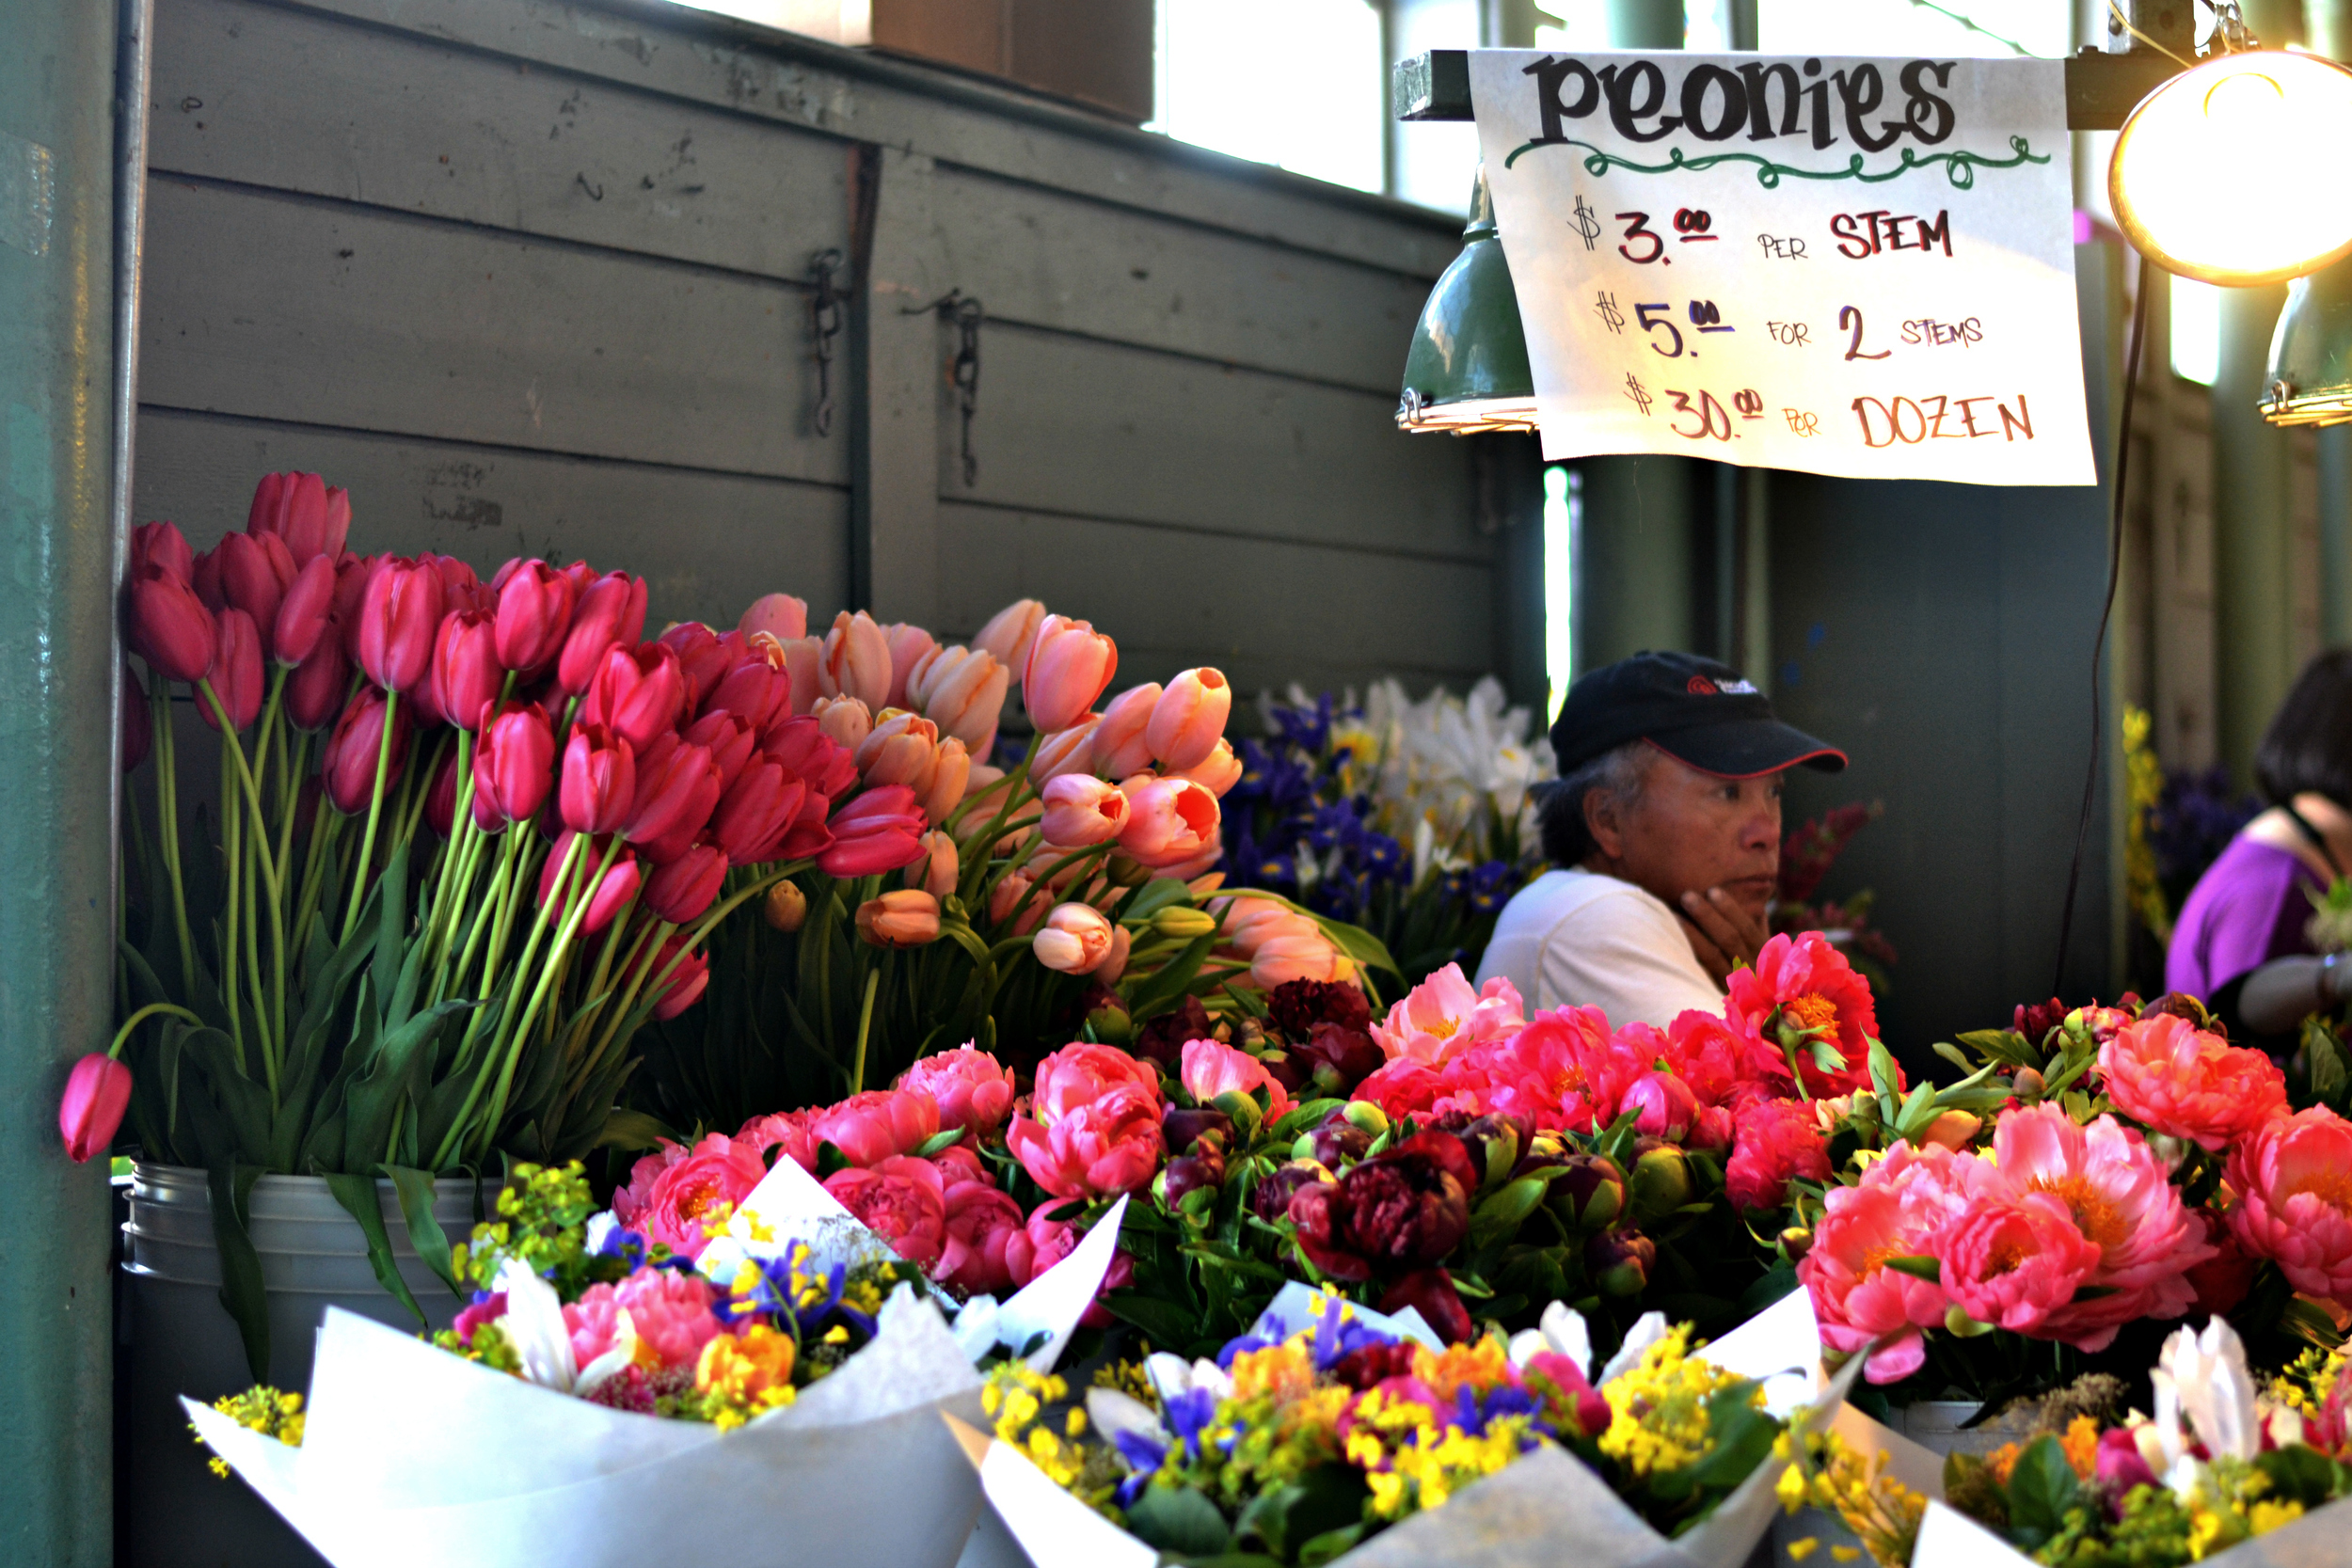 More Peonies + Tulips! Such great prices!